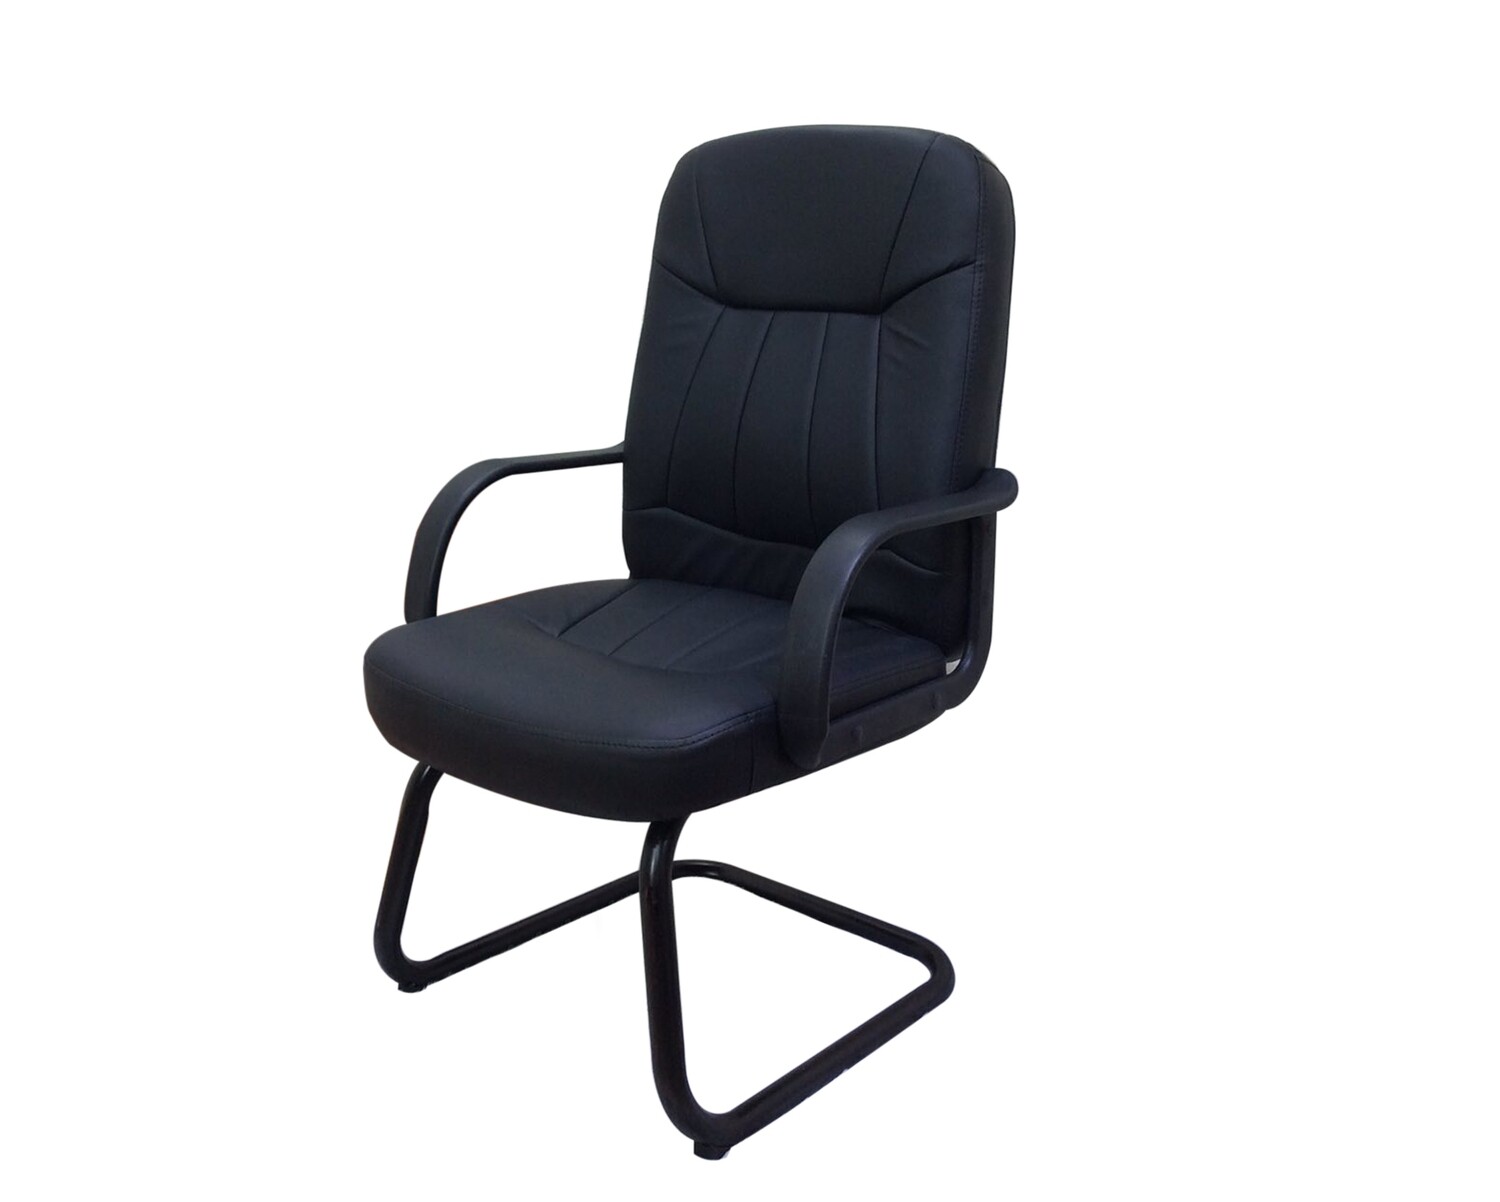 Ofix Deluxe-36W Waiting Chair PU Leather (Black)